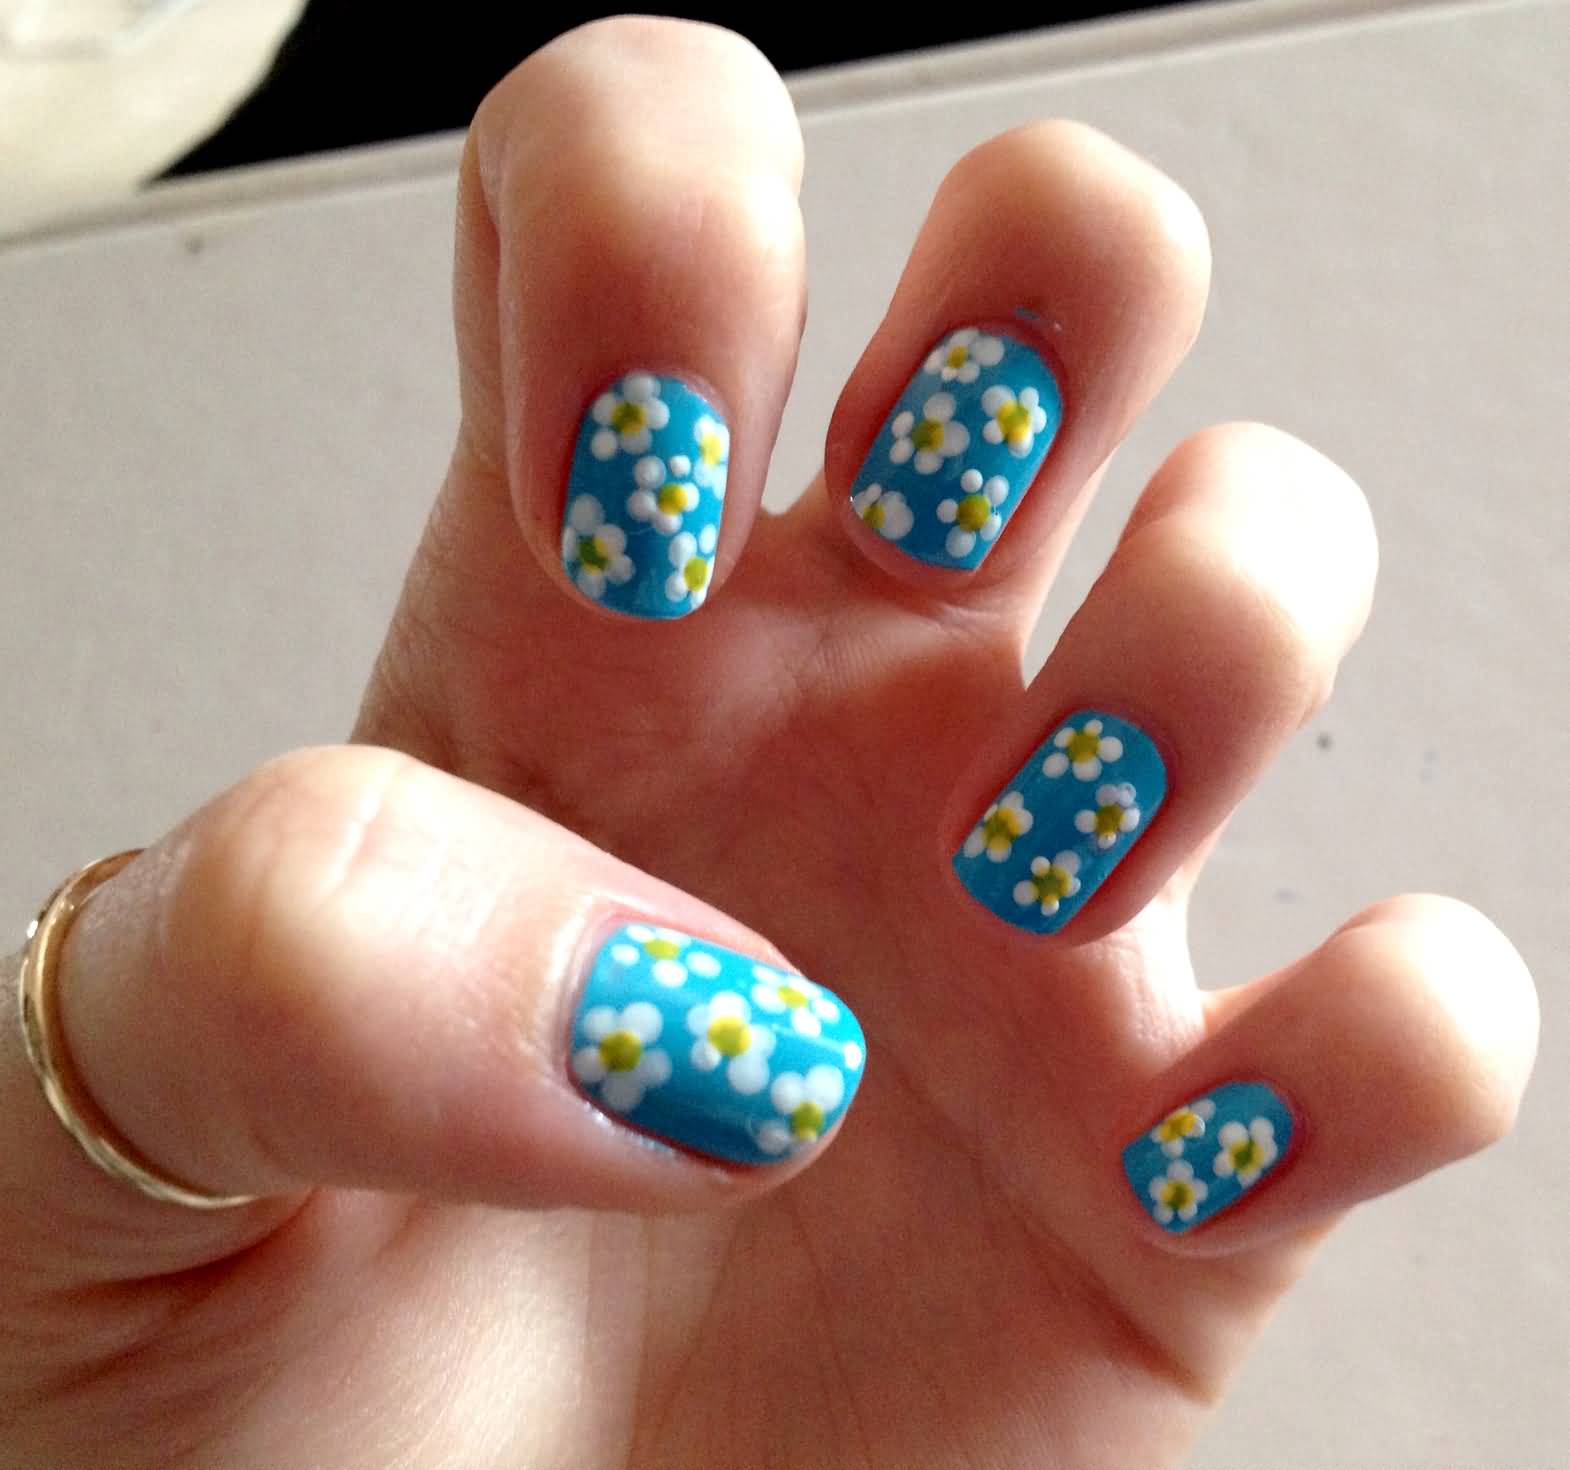 Blue Base Nails With White Spring Flowers Nail Art